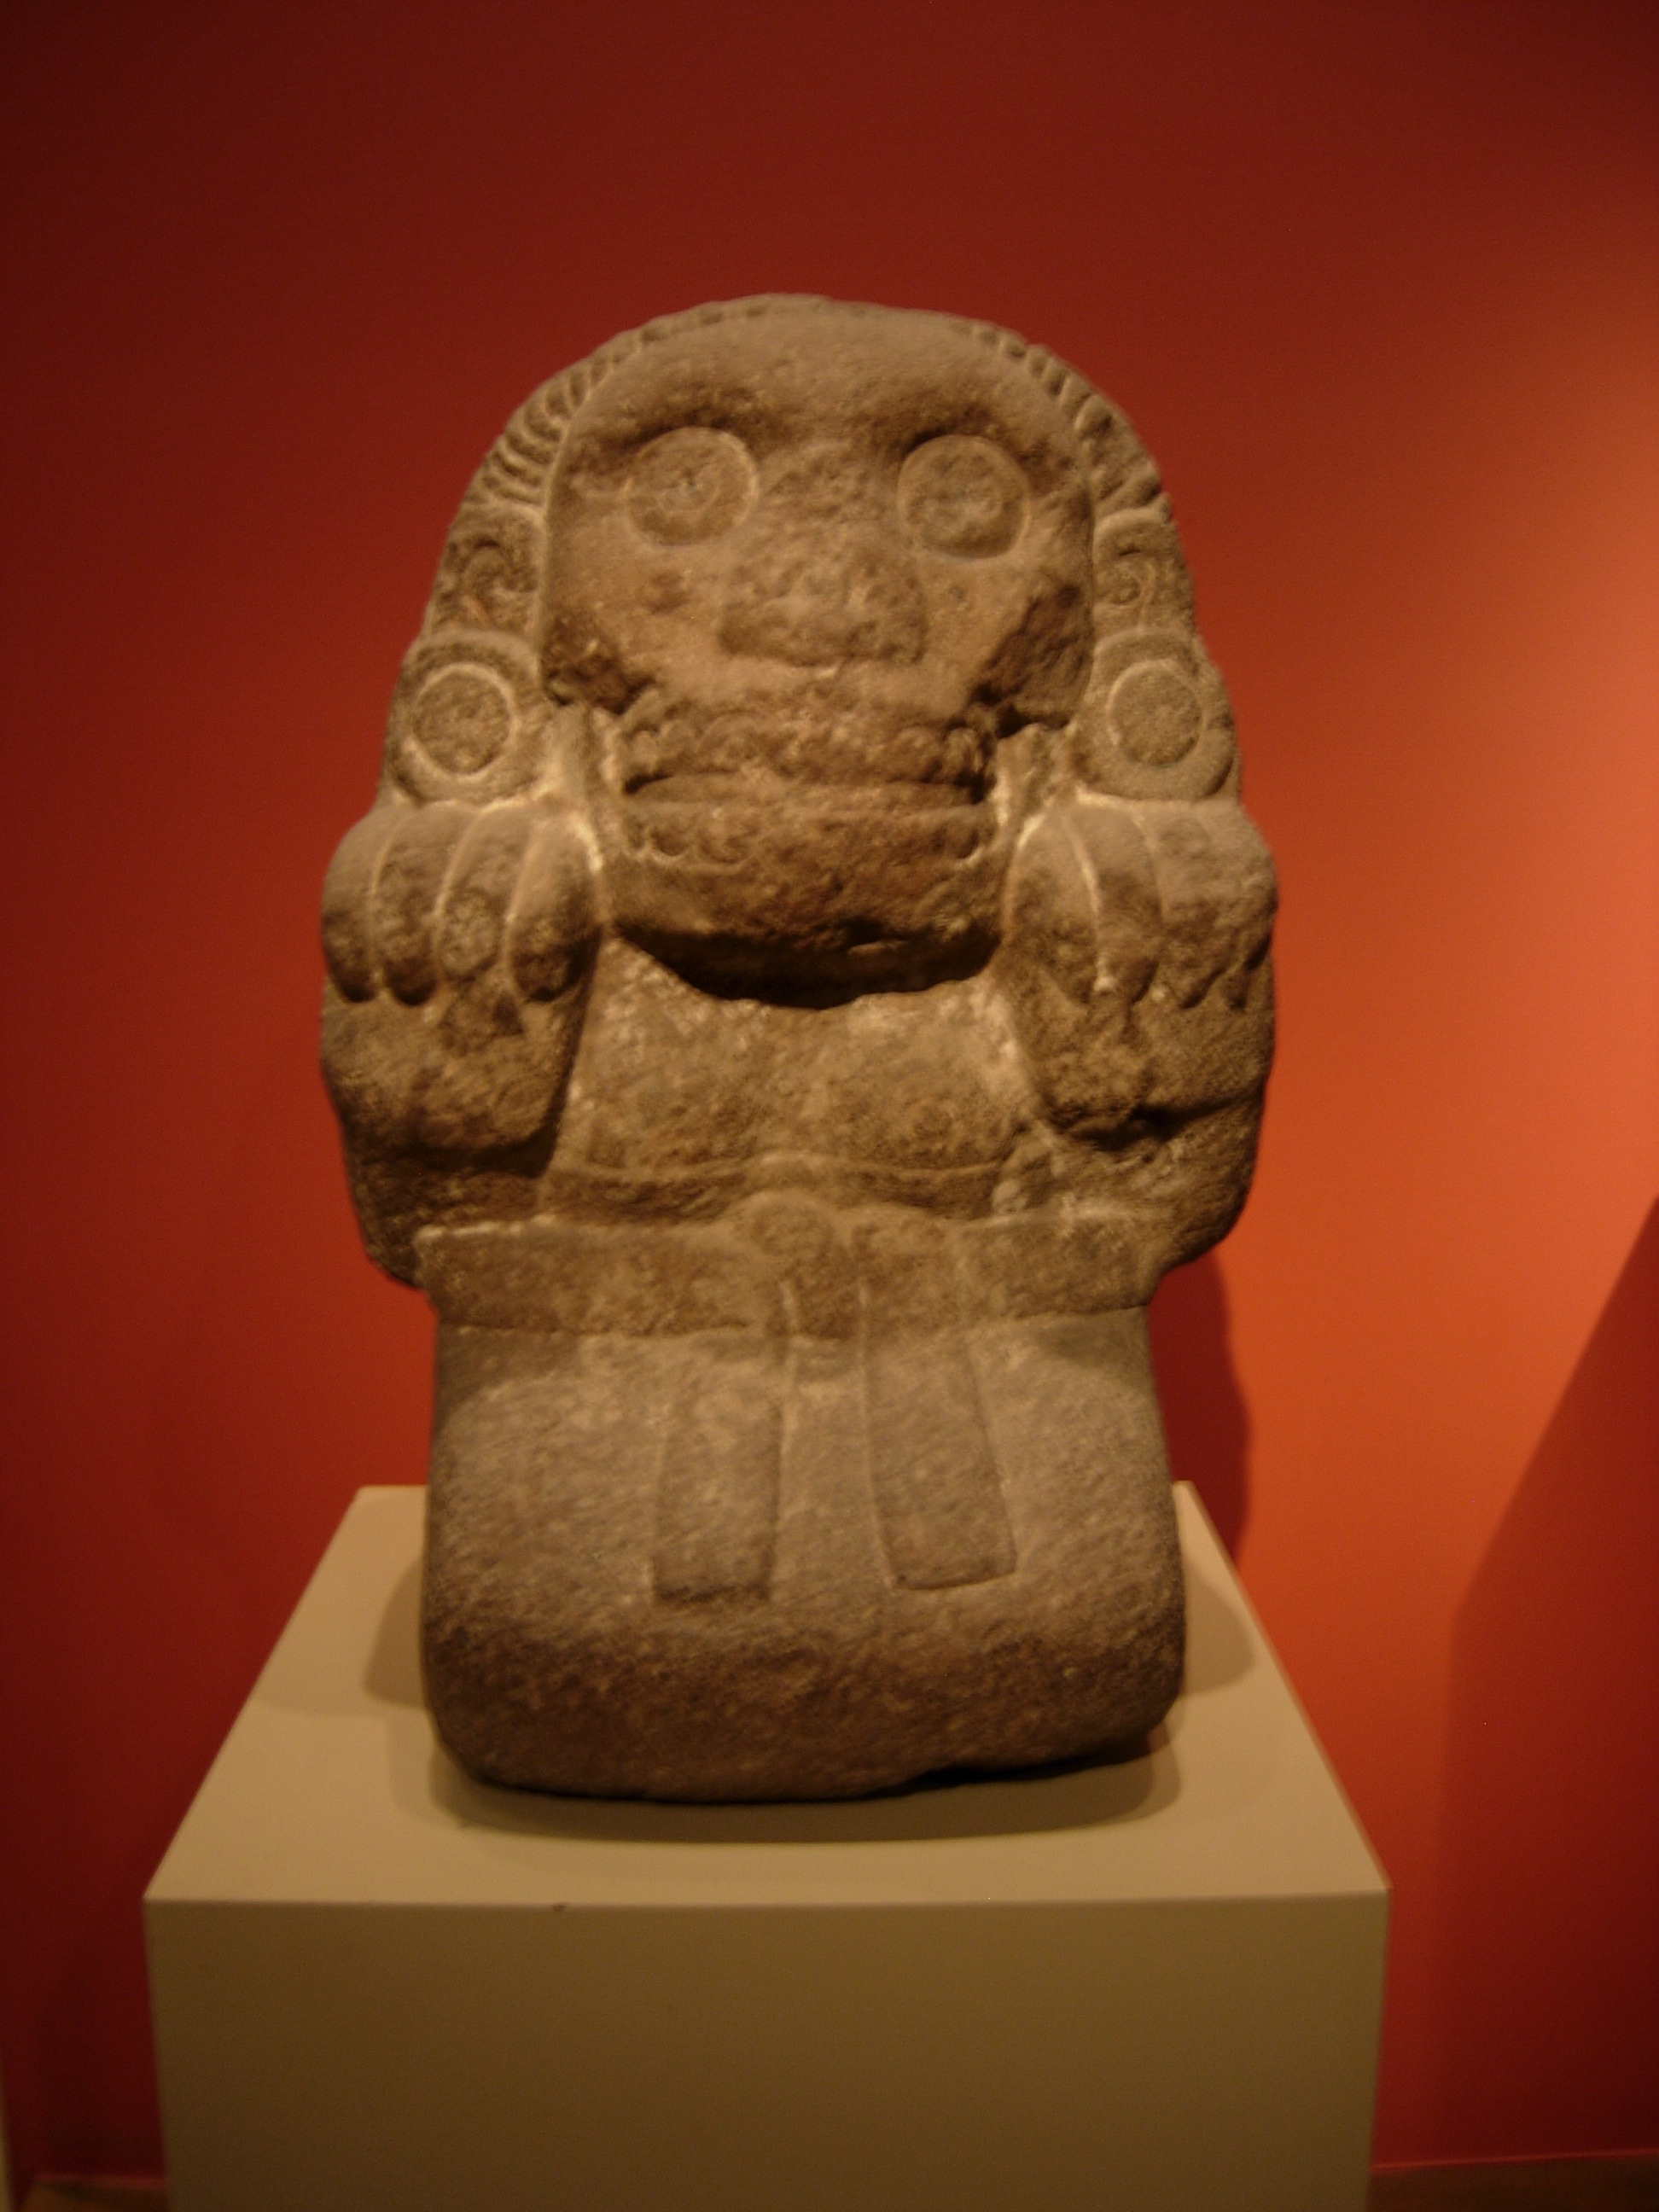 An Aztec sculpture of the Cihuateteo, a face suggestive of a skull and talons for hands